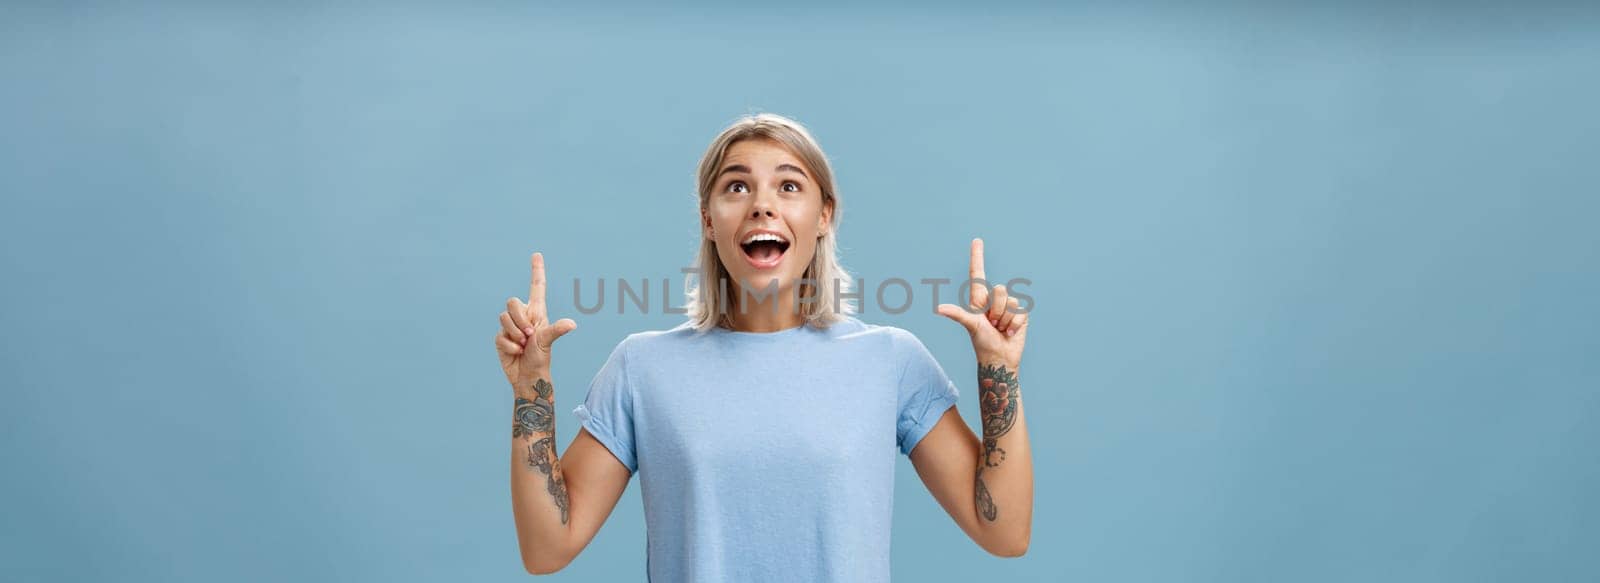 Studio shot of impressed speechless happy good-looking woman with tattoos on arms dropping jaw from amazement and joy gazing fascinated and pointing up standing over blue background by Benzoix